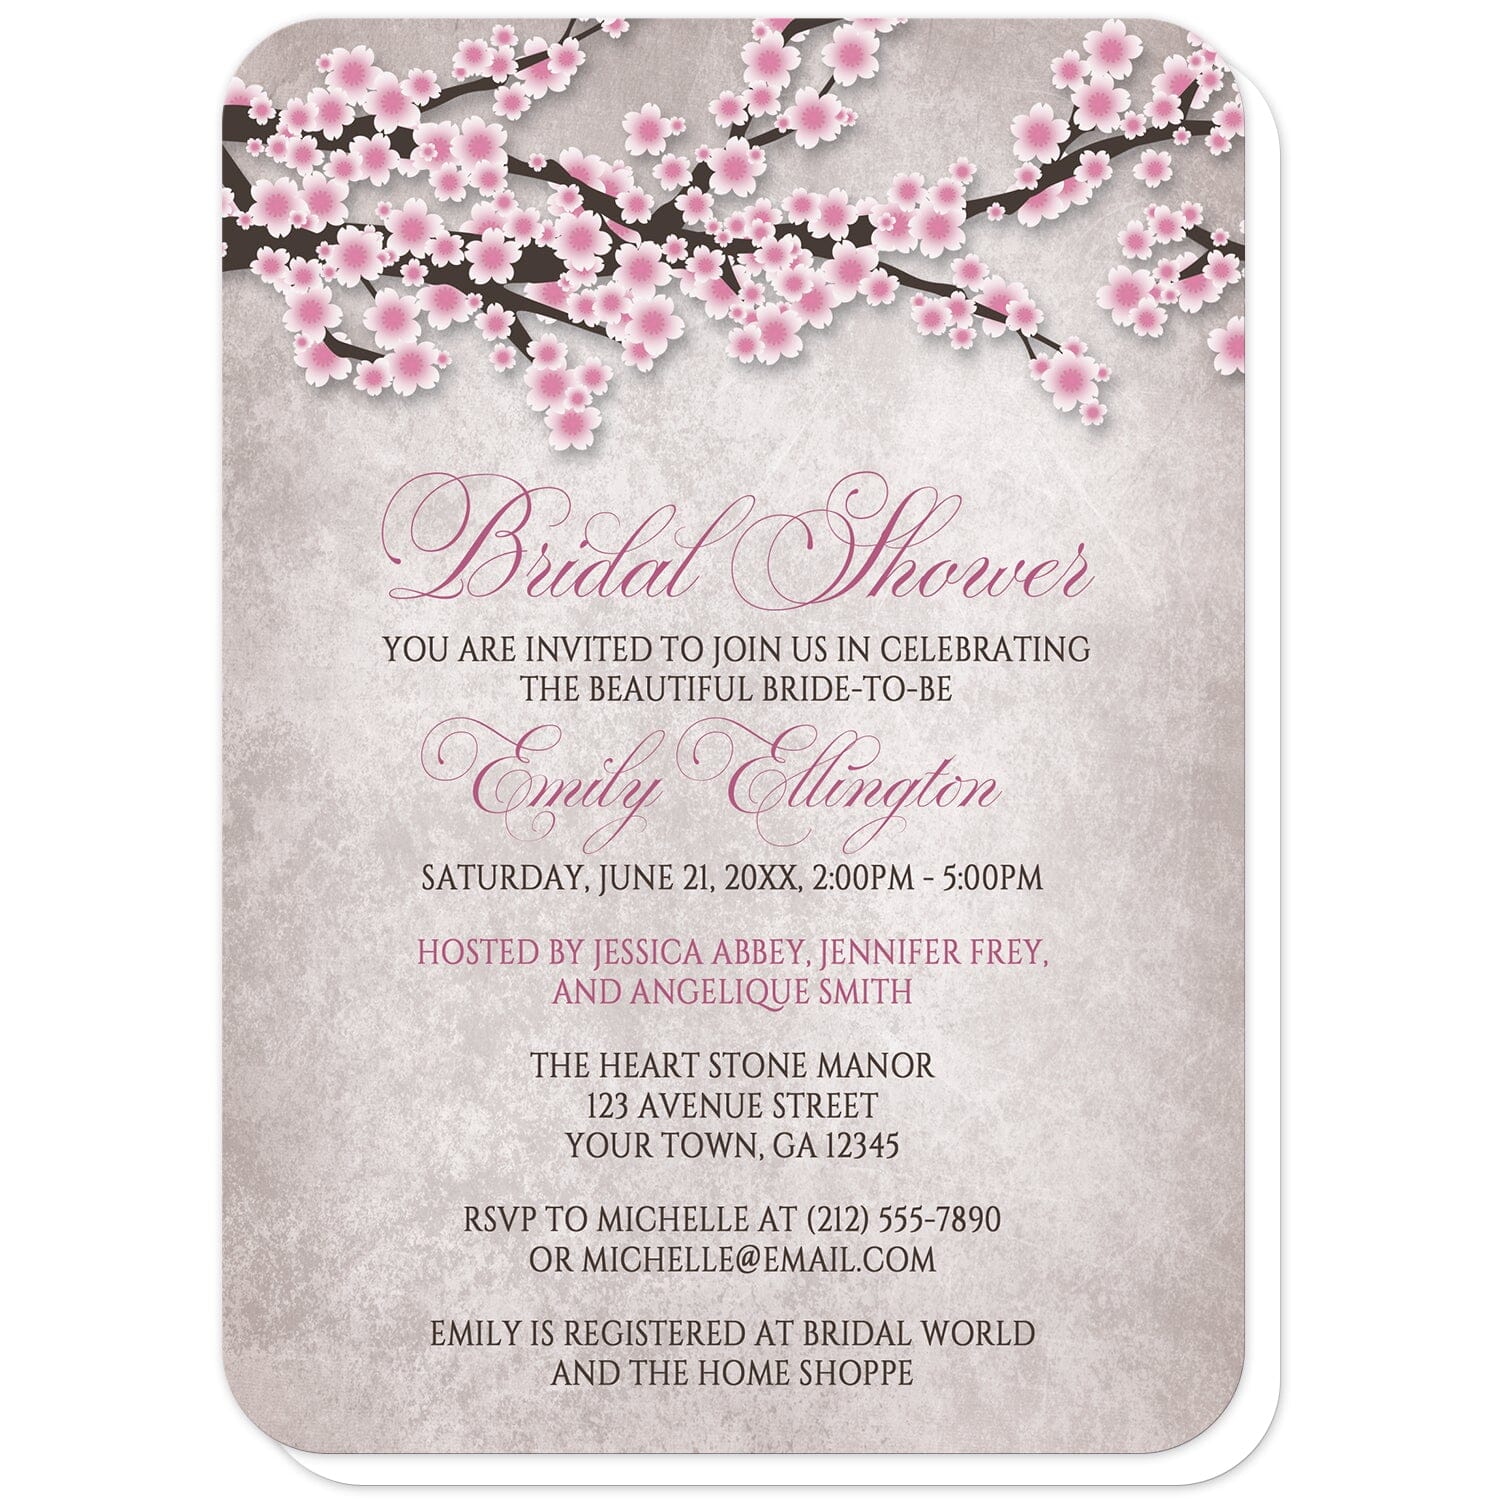 Rustic Pink Cherry Blossom Bridal Shower Invitations (with rounded corners) at Artistically Invited. Rustic pink cherry blossom bridal shower invitations featuring an illustration of pink and white with dark brown cherry blossom branches along the top. Your personalized bridal shower celebration details are custom printed in pink and dark brown over a stony grayish brown background below the pretty cherry blossom branches. 